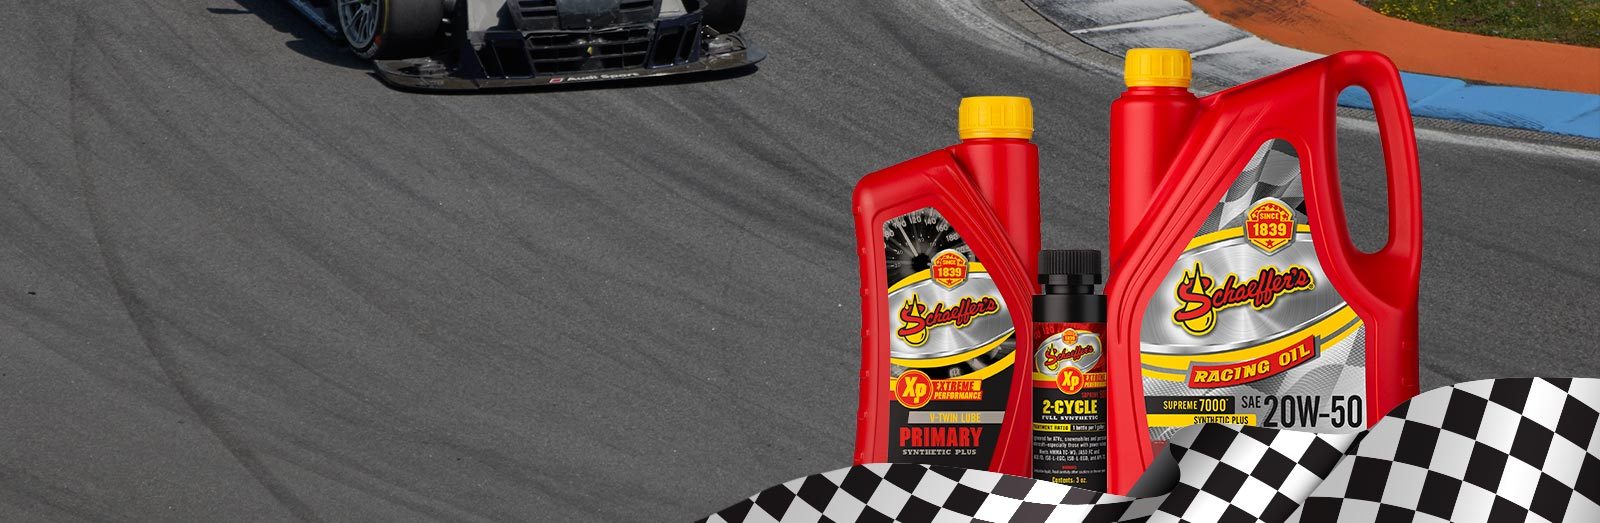 Schaeffer Oil - Fueling Every Victory